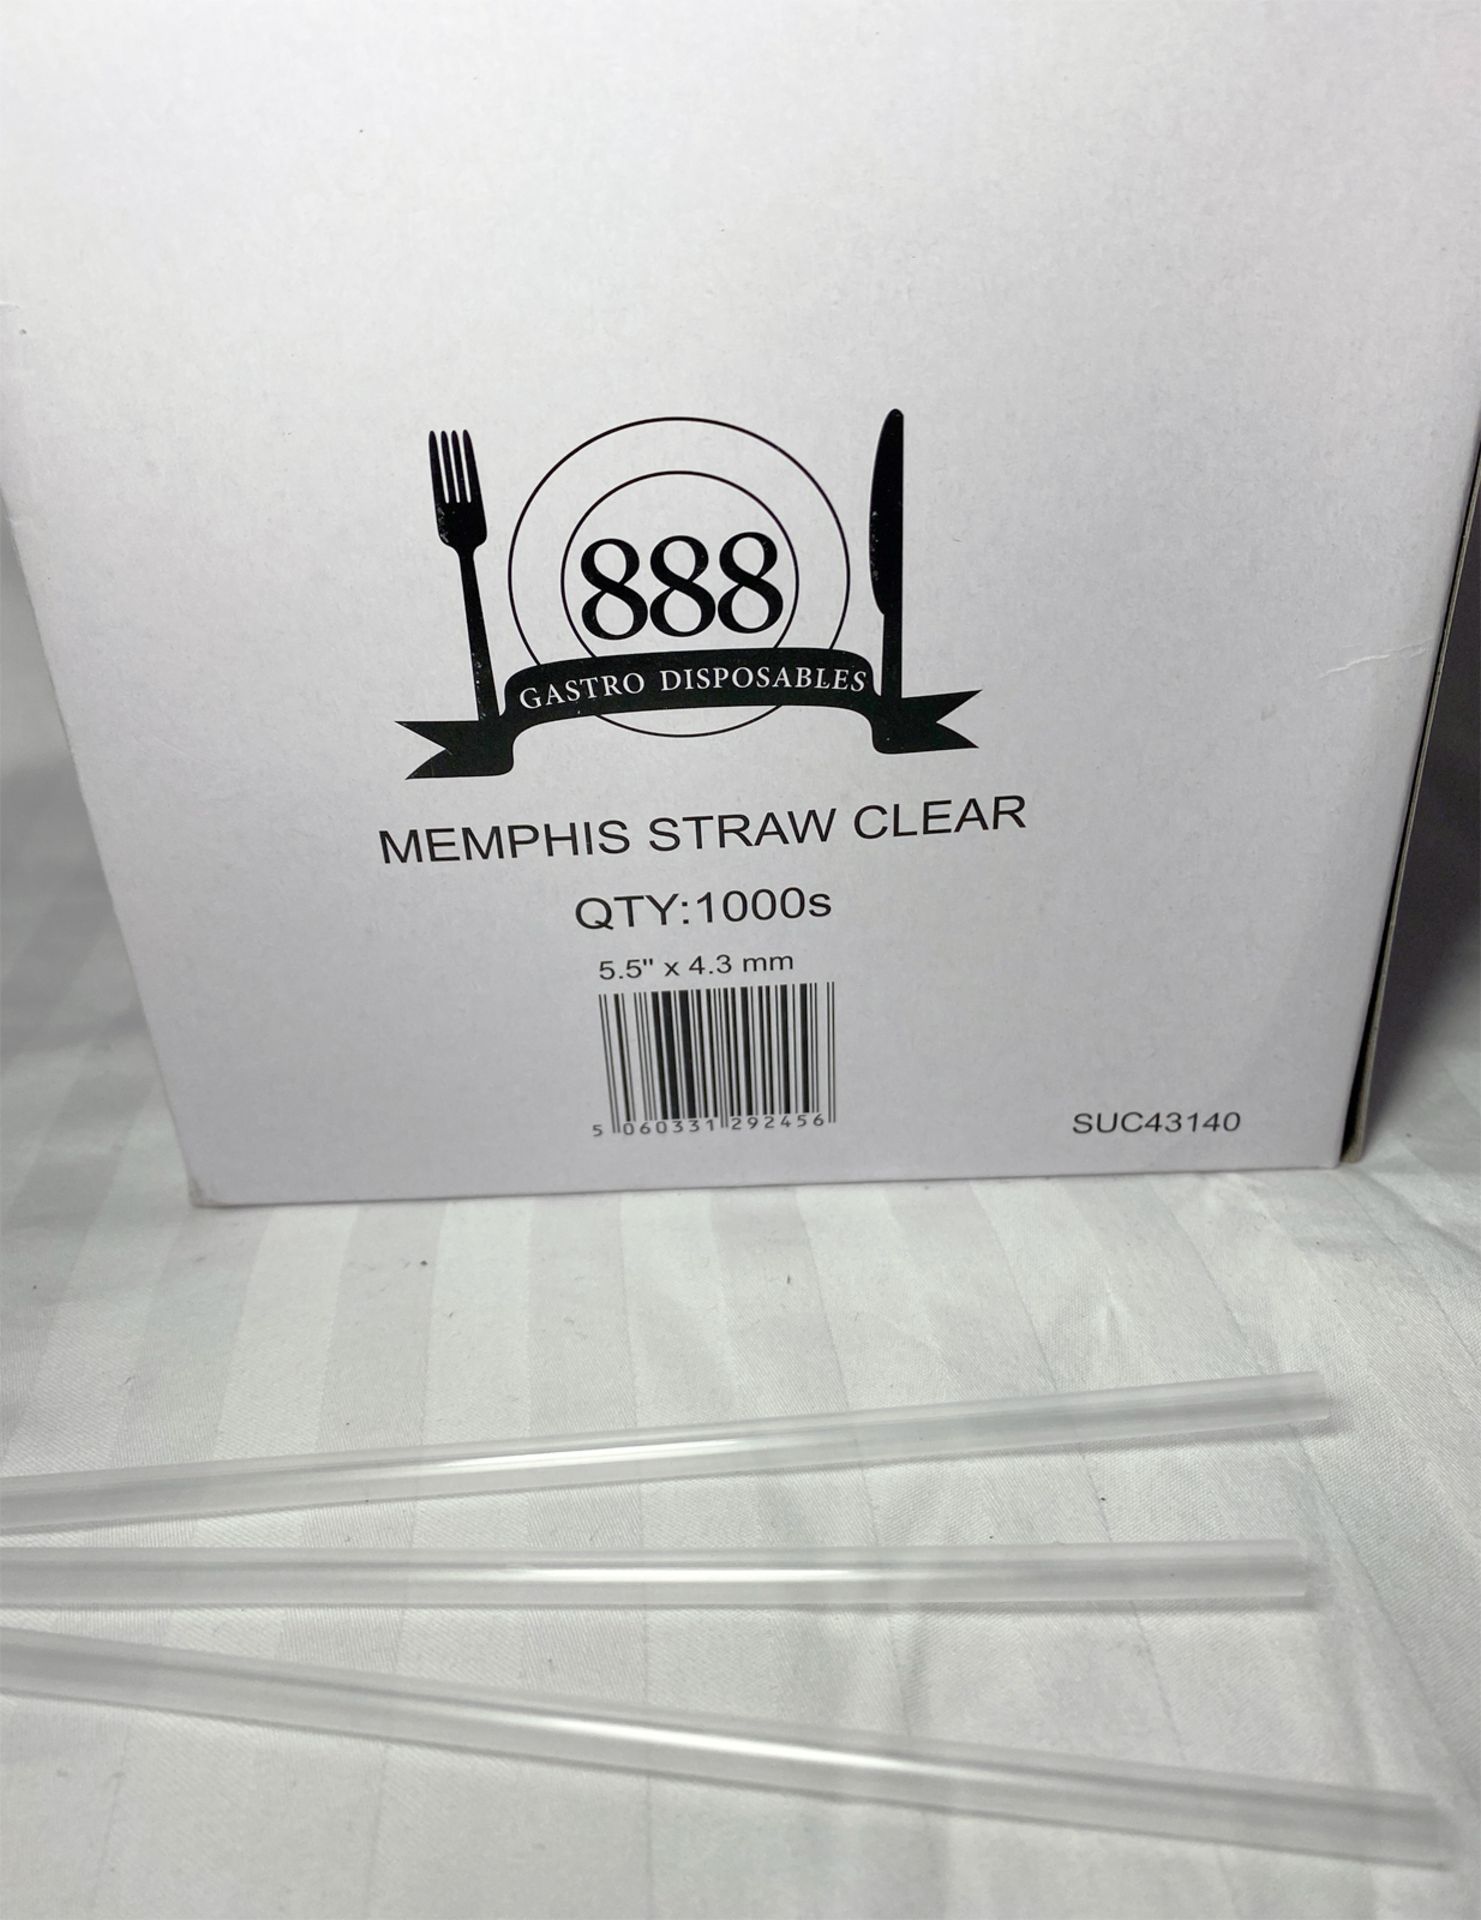 5 x Boxes of Memphis Straws by 888 Gastro Disposables - Image 2 of 2